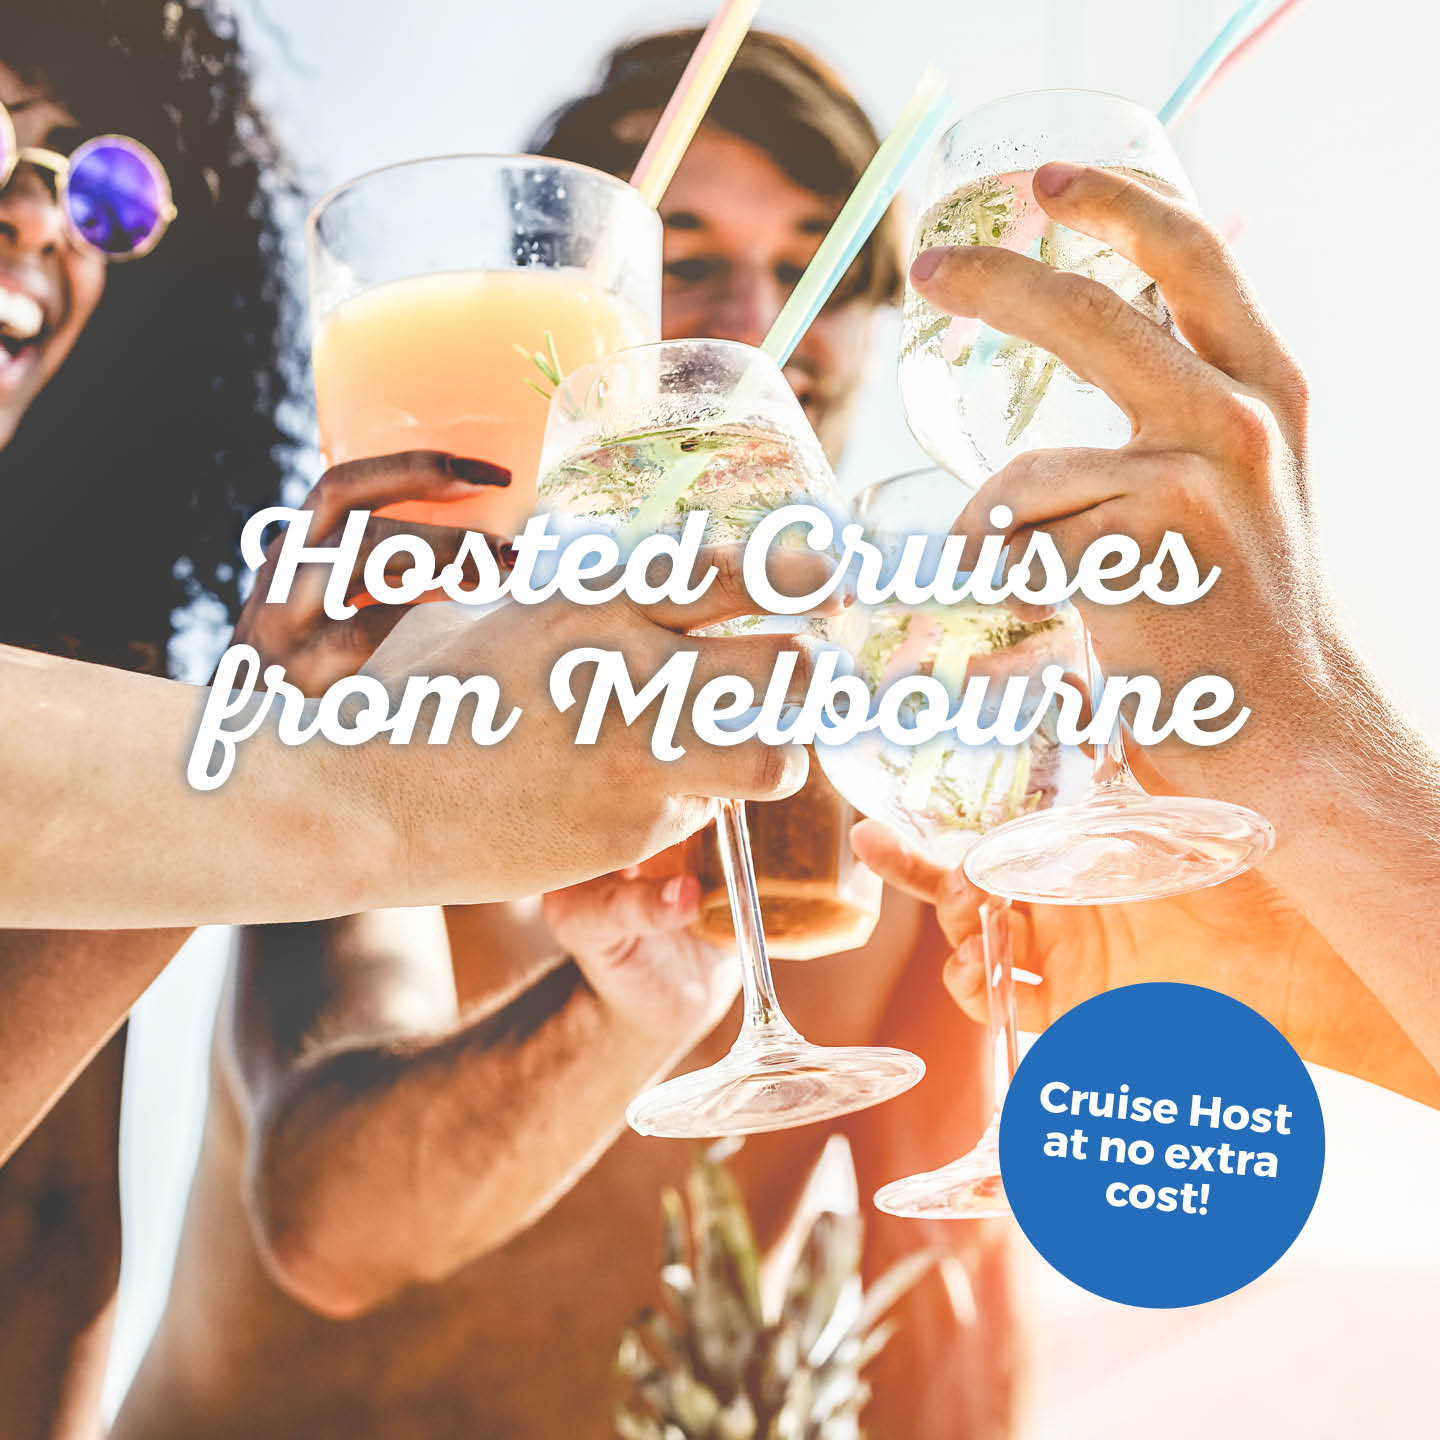 hosted-cruises-from-melbourne-thumb.jpg